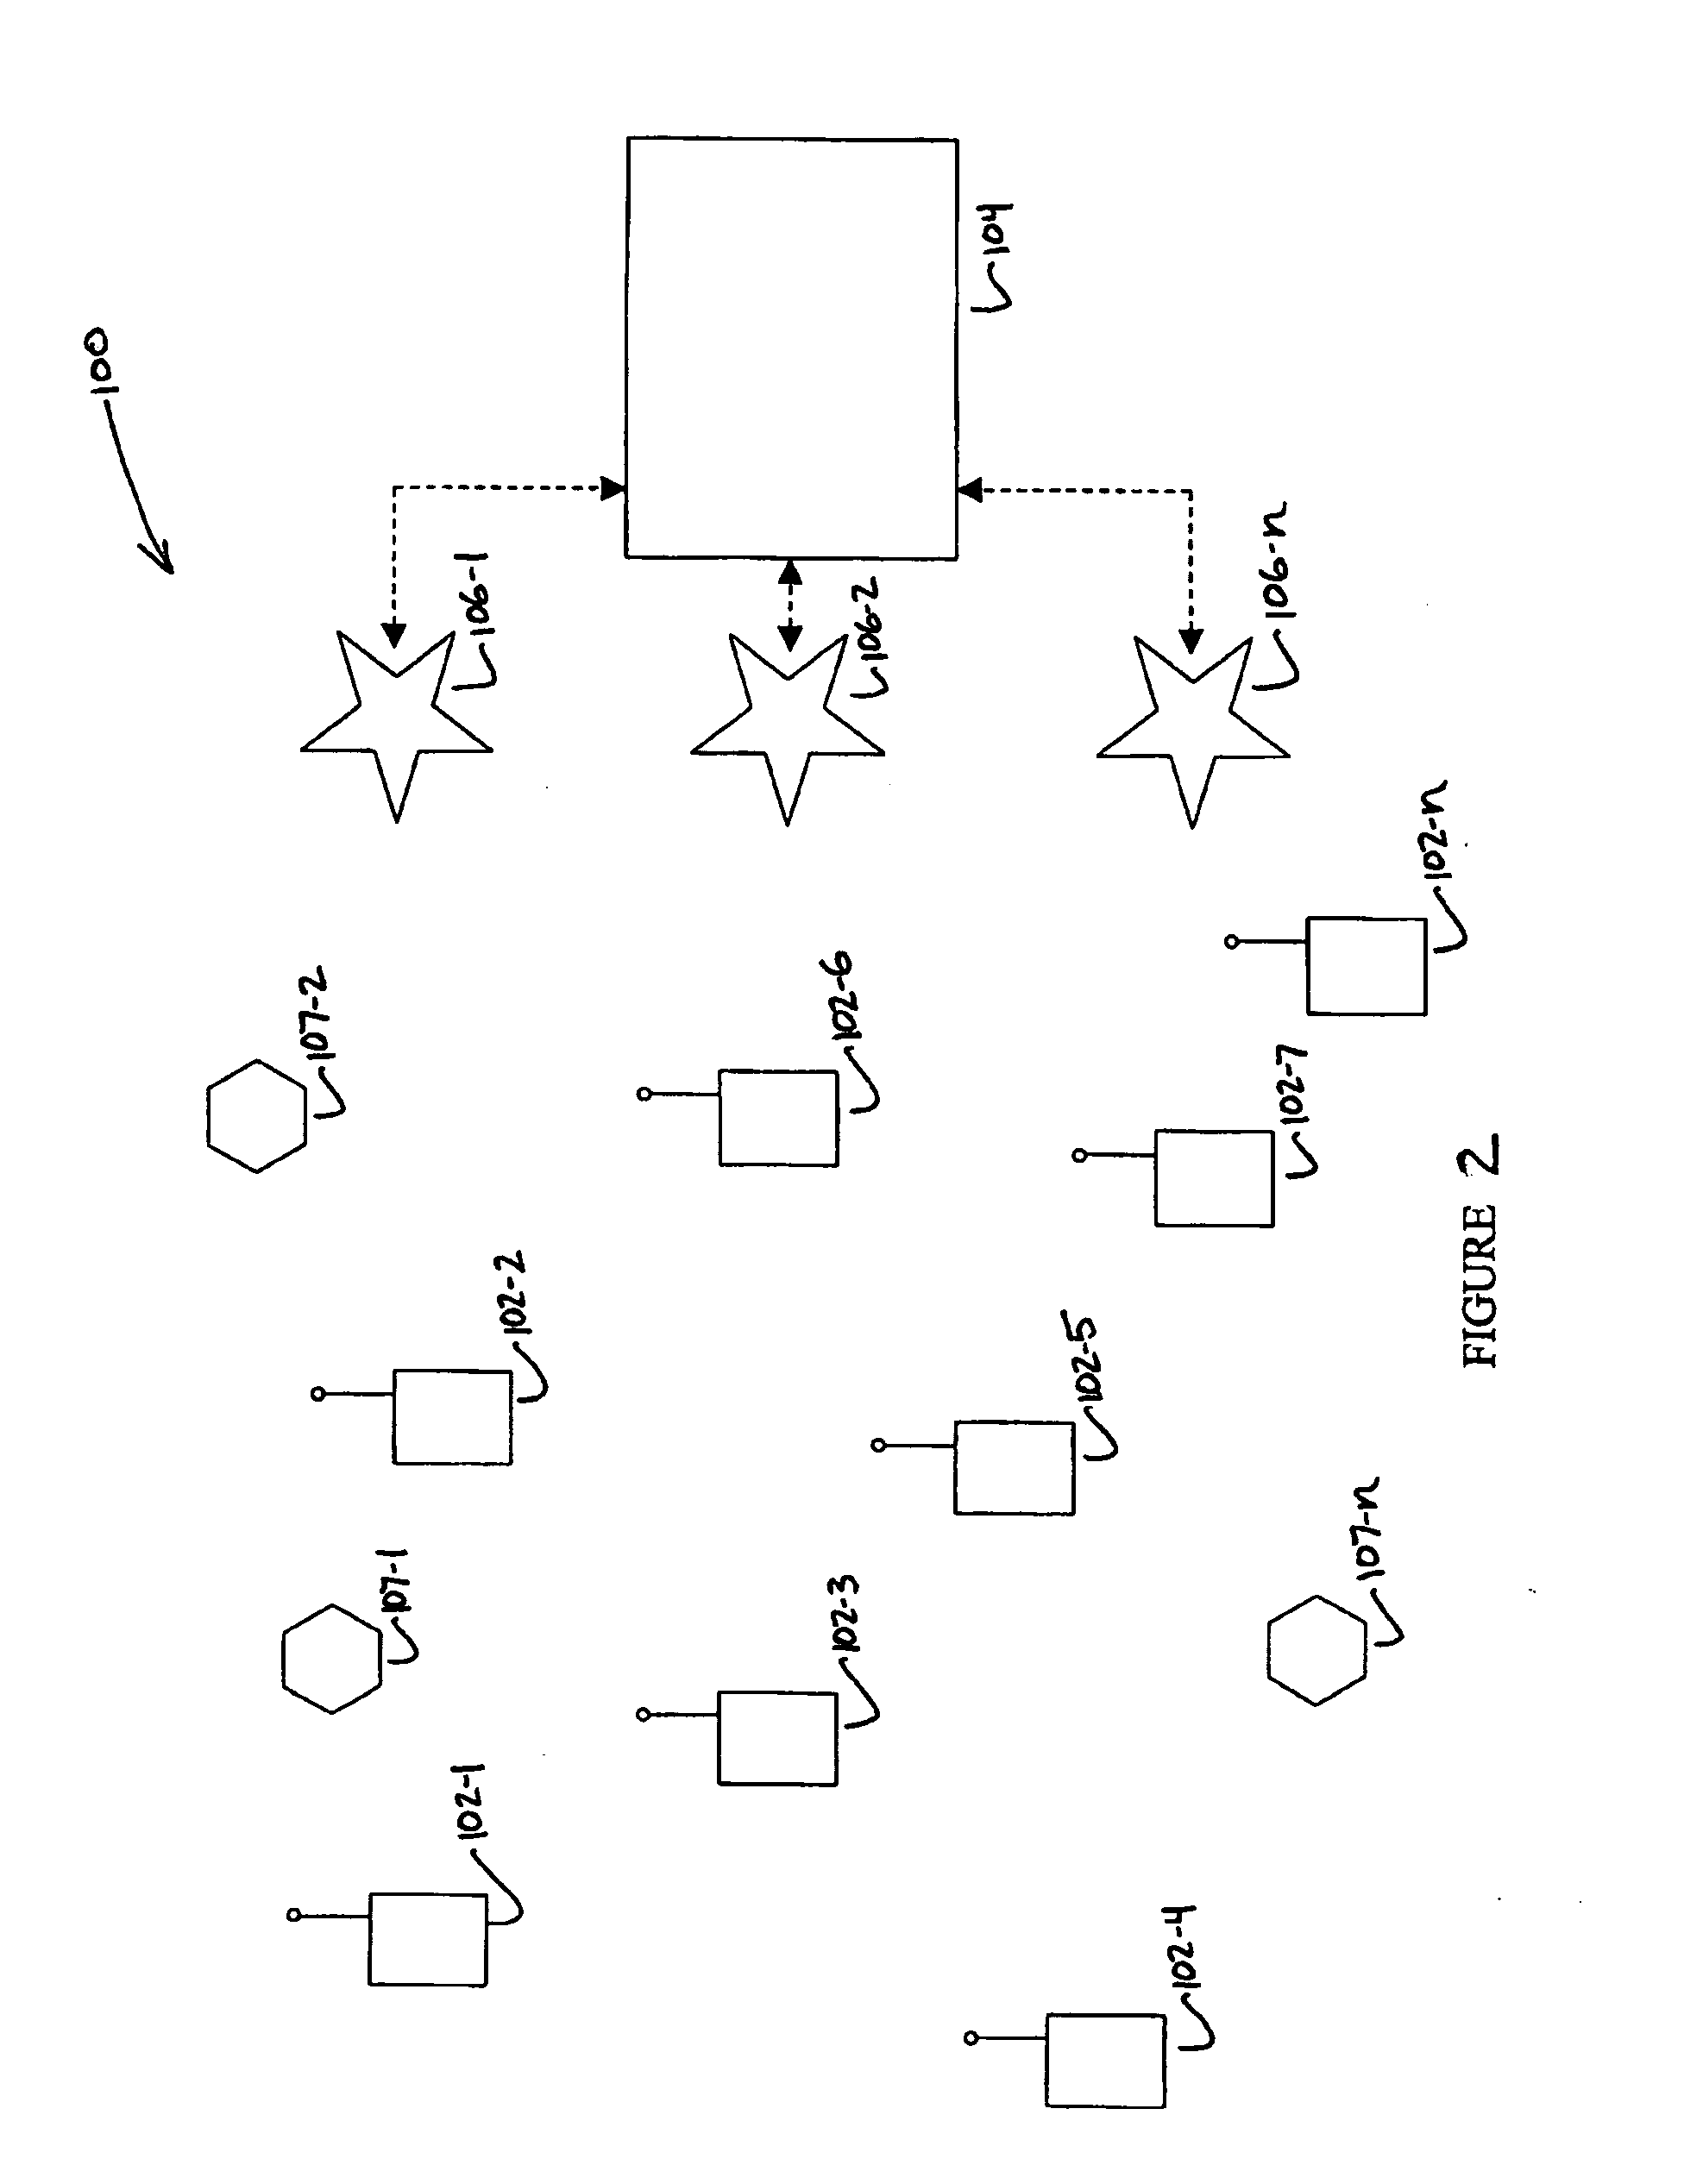 System and method to decrease the route convergence time and find optimal routes in a wireless communication network